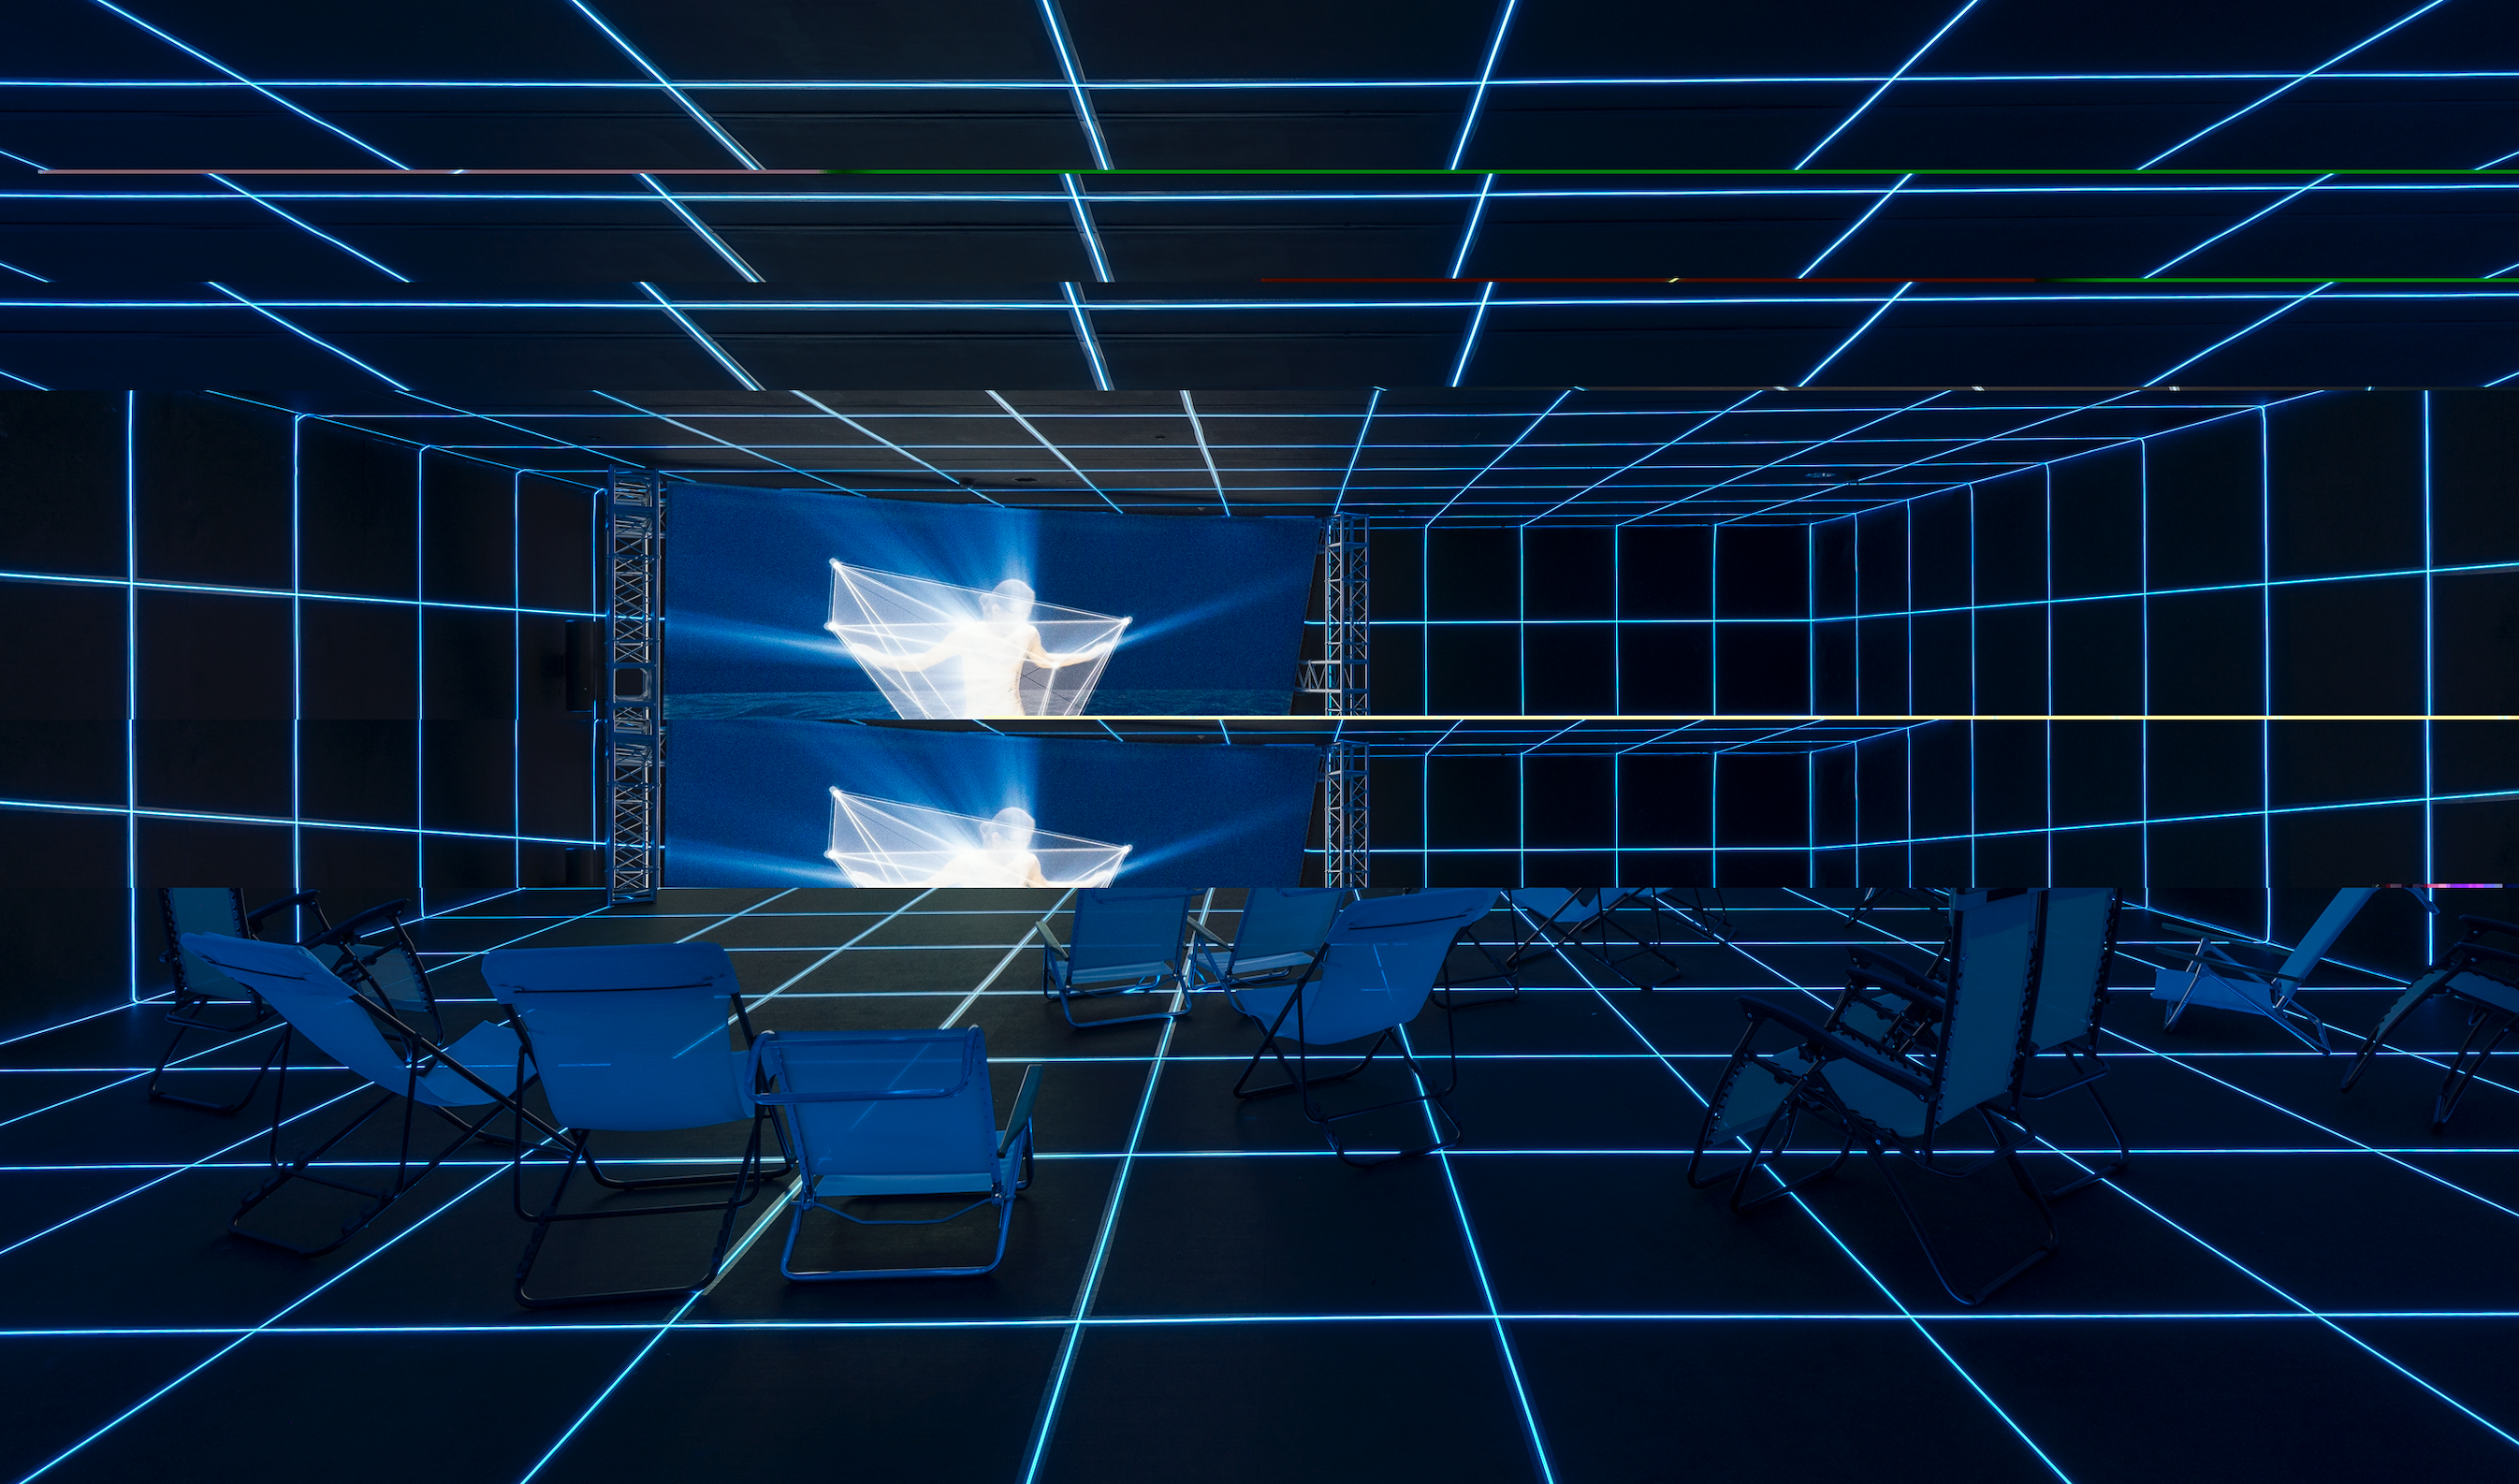 Hito Steyerl: Factory of the Sun